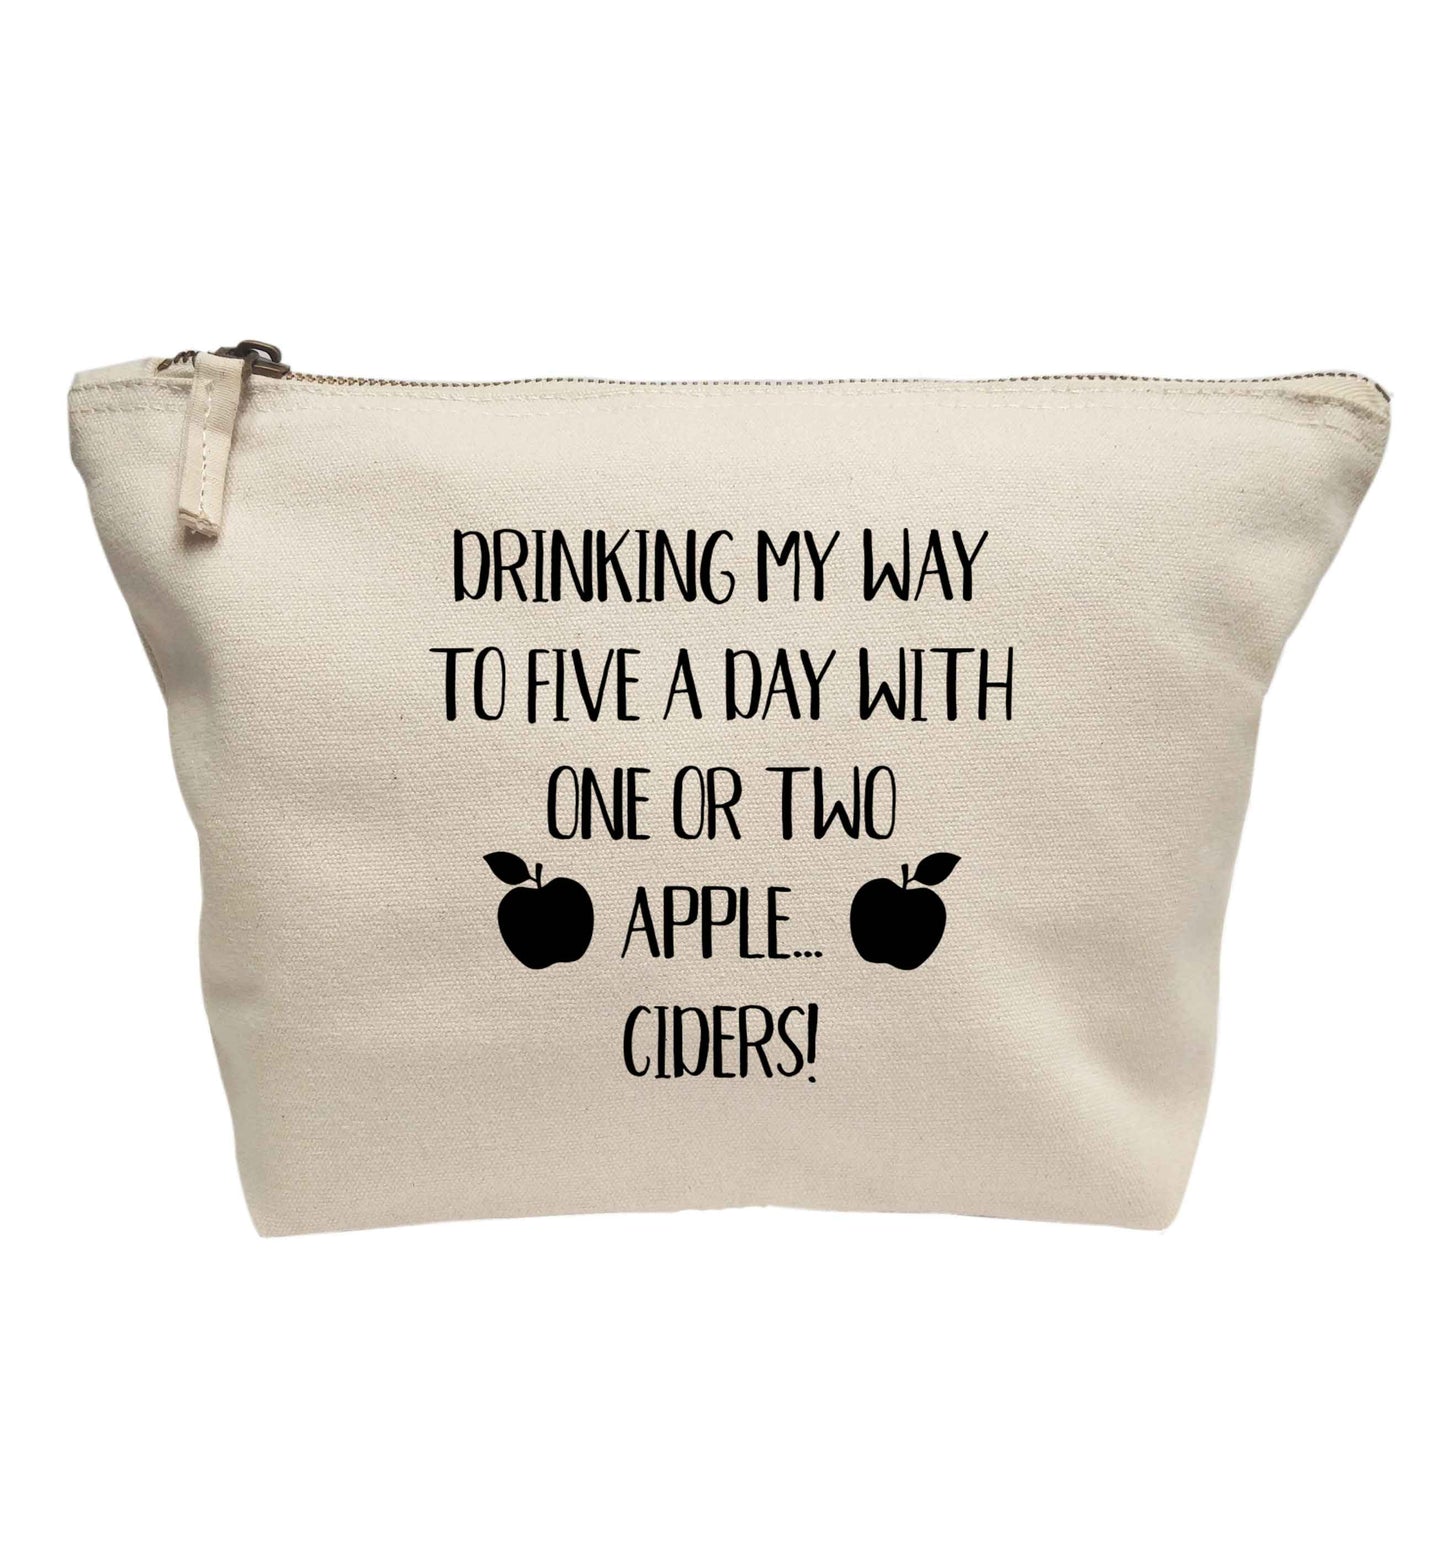 Drinking my way to five a day with one or two apple ciders | makeup / wash bag